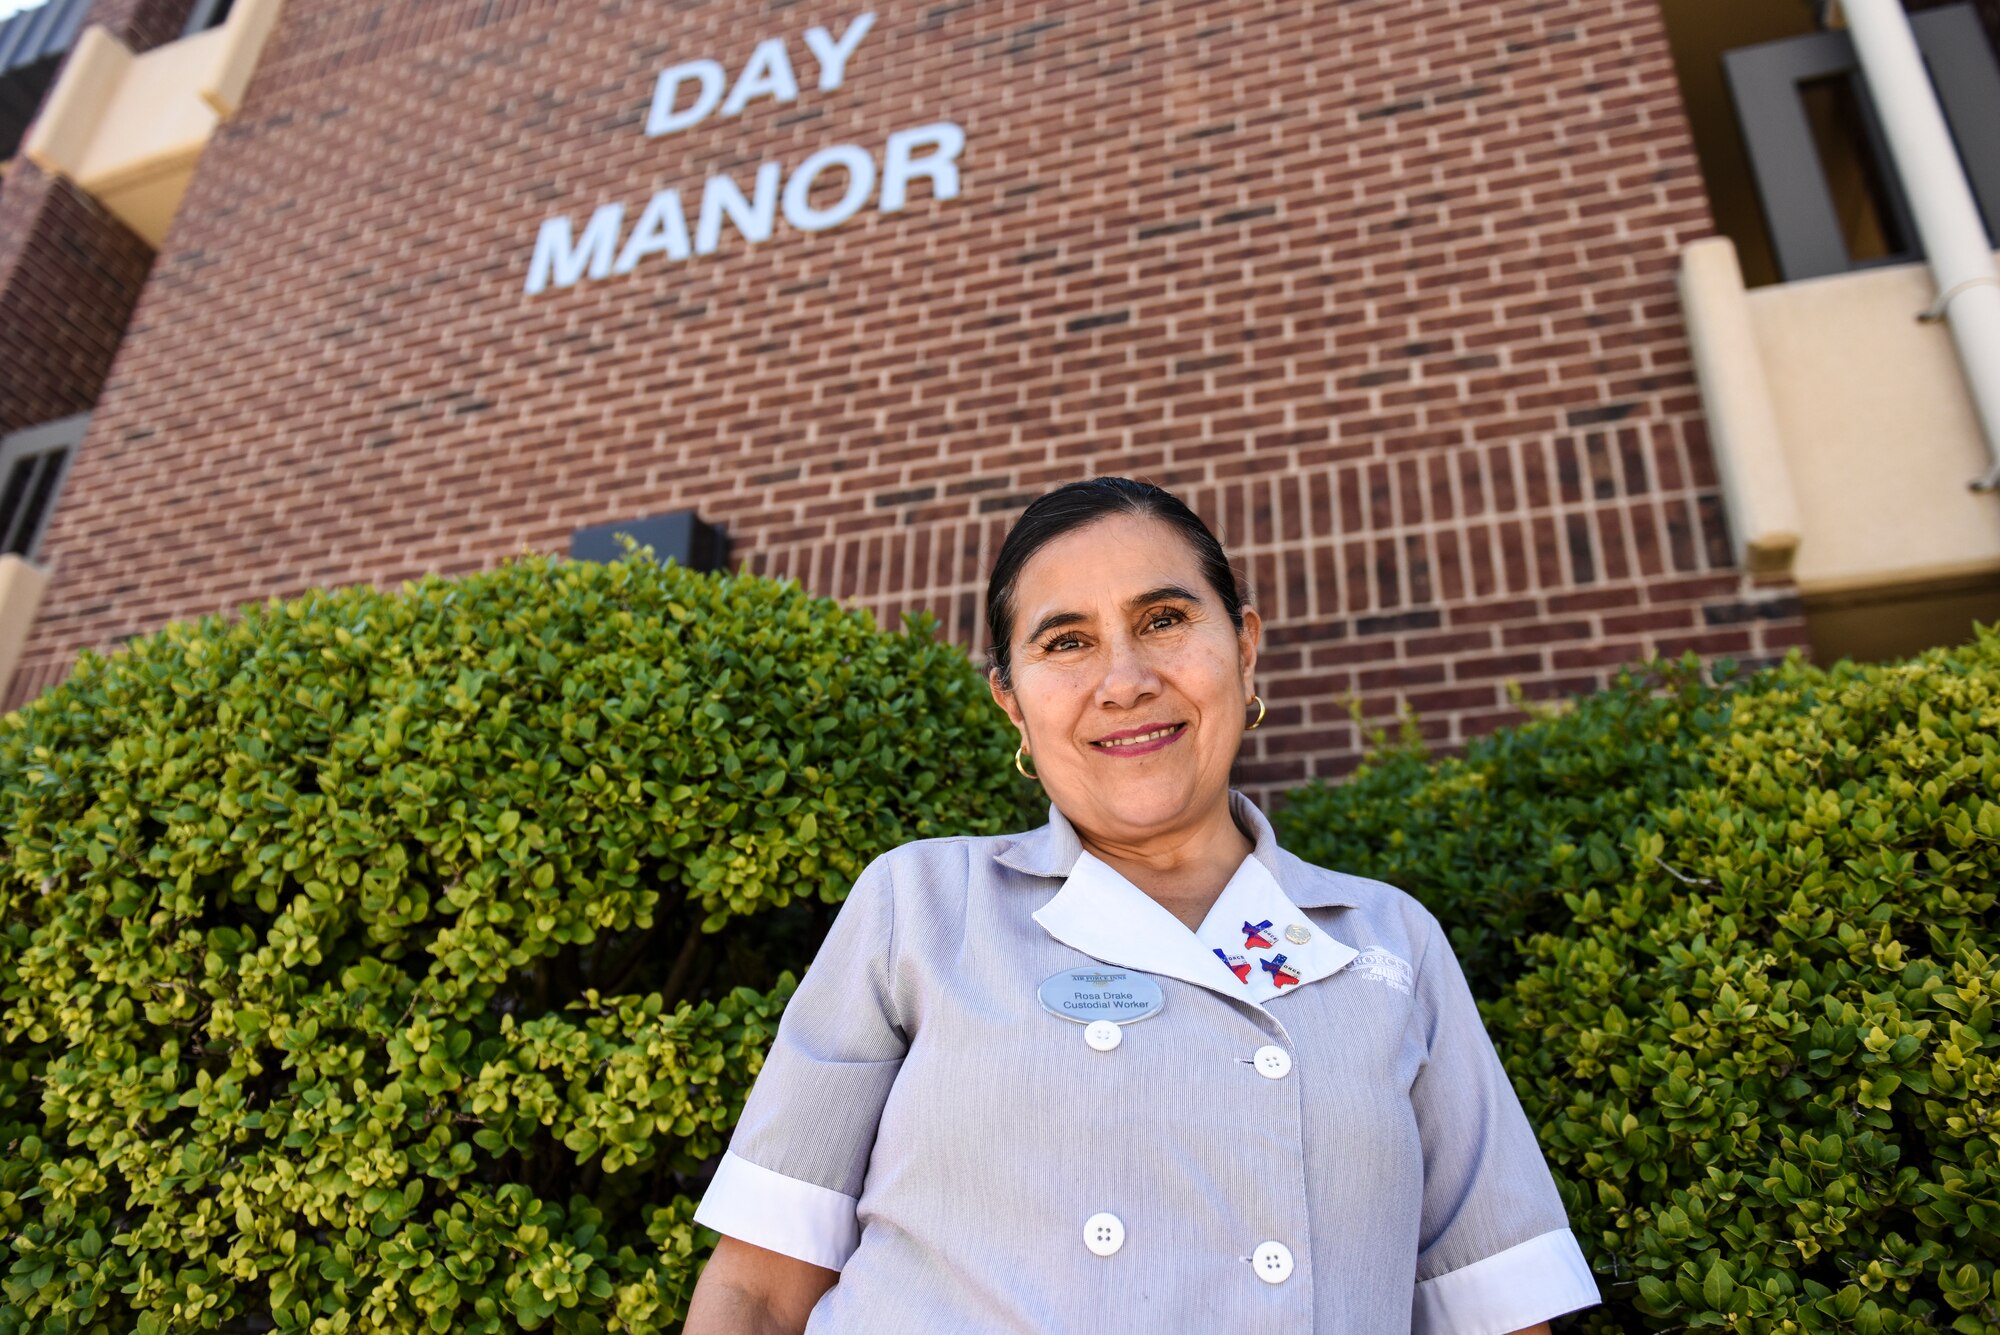 Angelo Inn housekeeper, Rosa Drake, stands before Day Manor where she works on Goodfellow Air Force Base, Texas, Sept. 24, 2018.  Drake has worked for Air Force lodging for five years. (U.S. Air Force photo by Aryn Lockhart/Released)